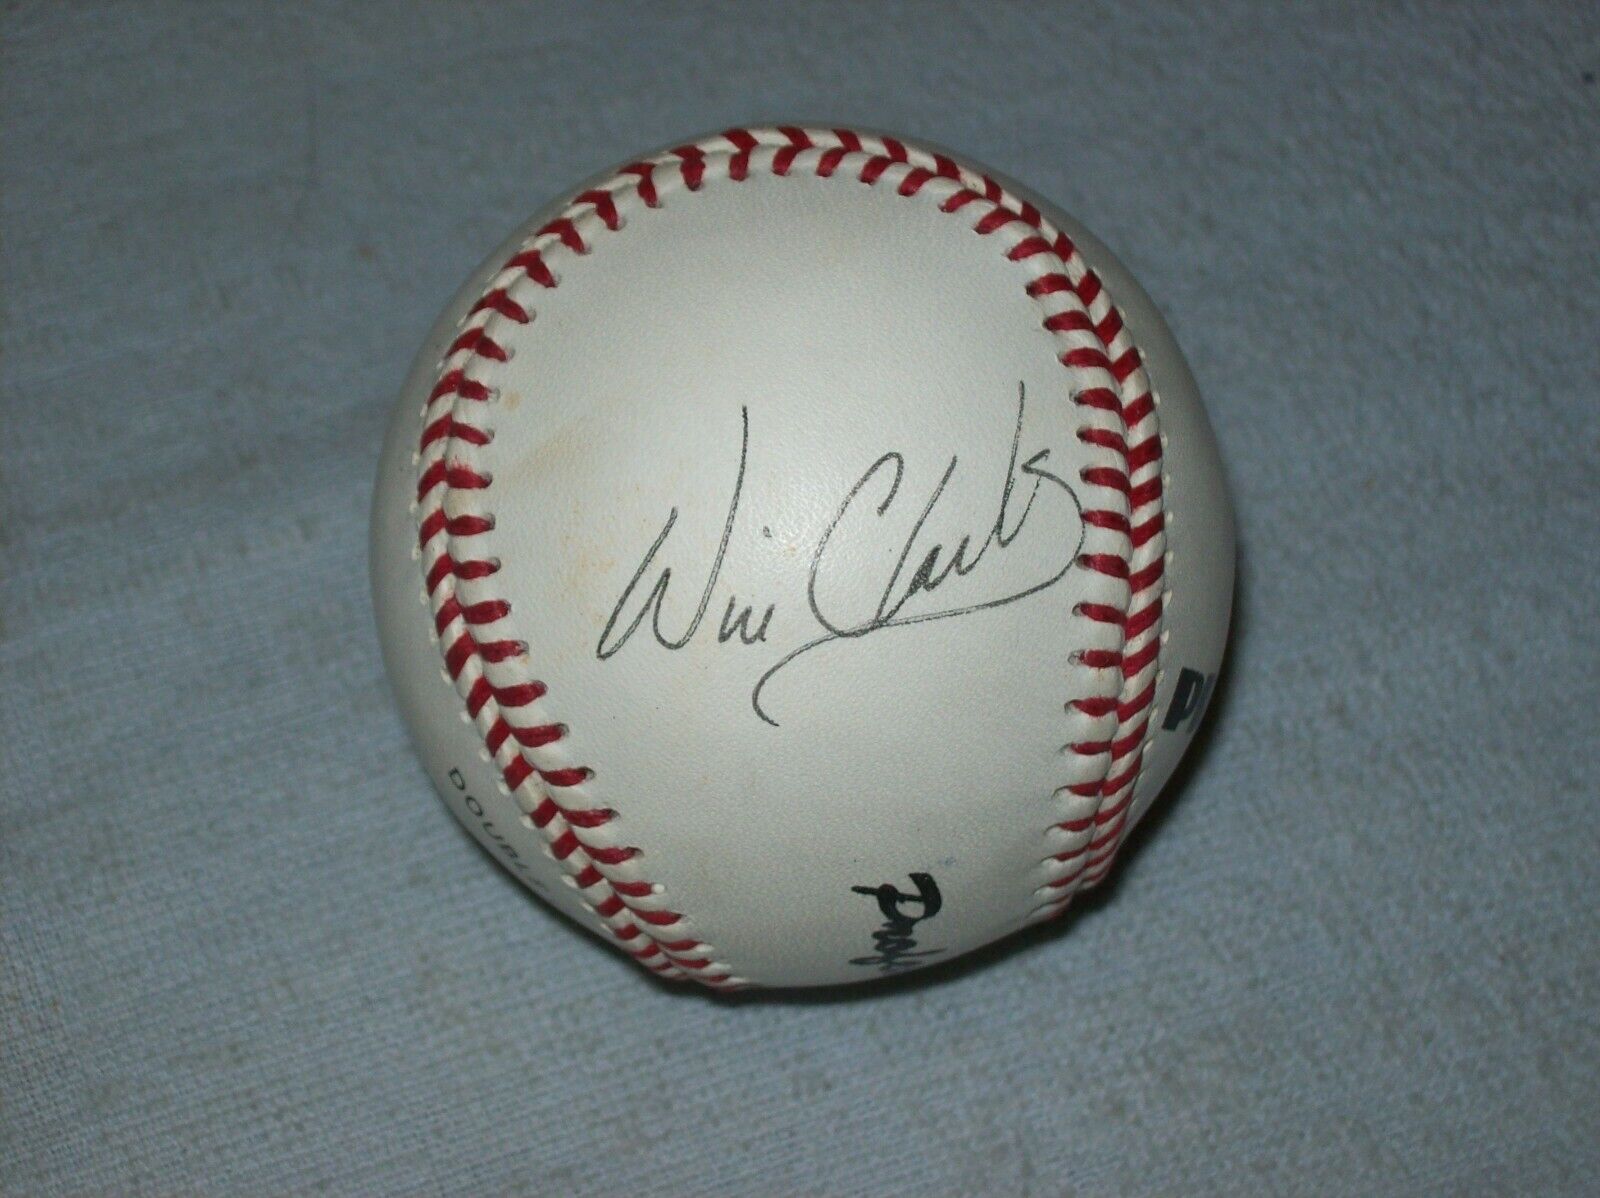 Will Clark Hand Signed Autographed Baseball  GUARANTEED AUTHENTIC